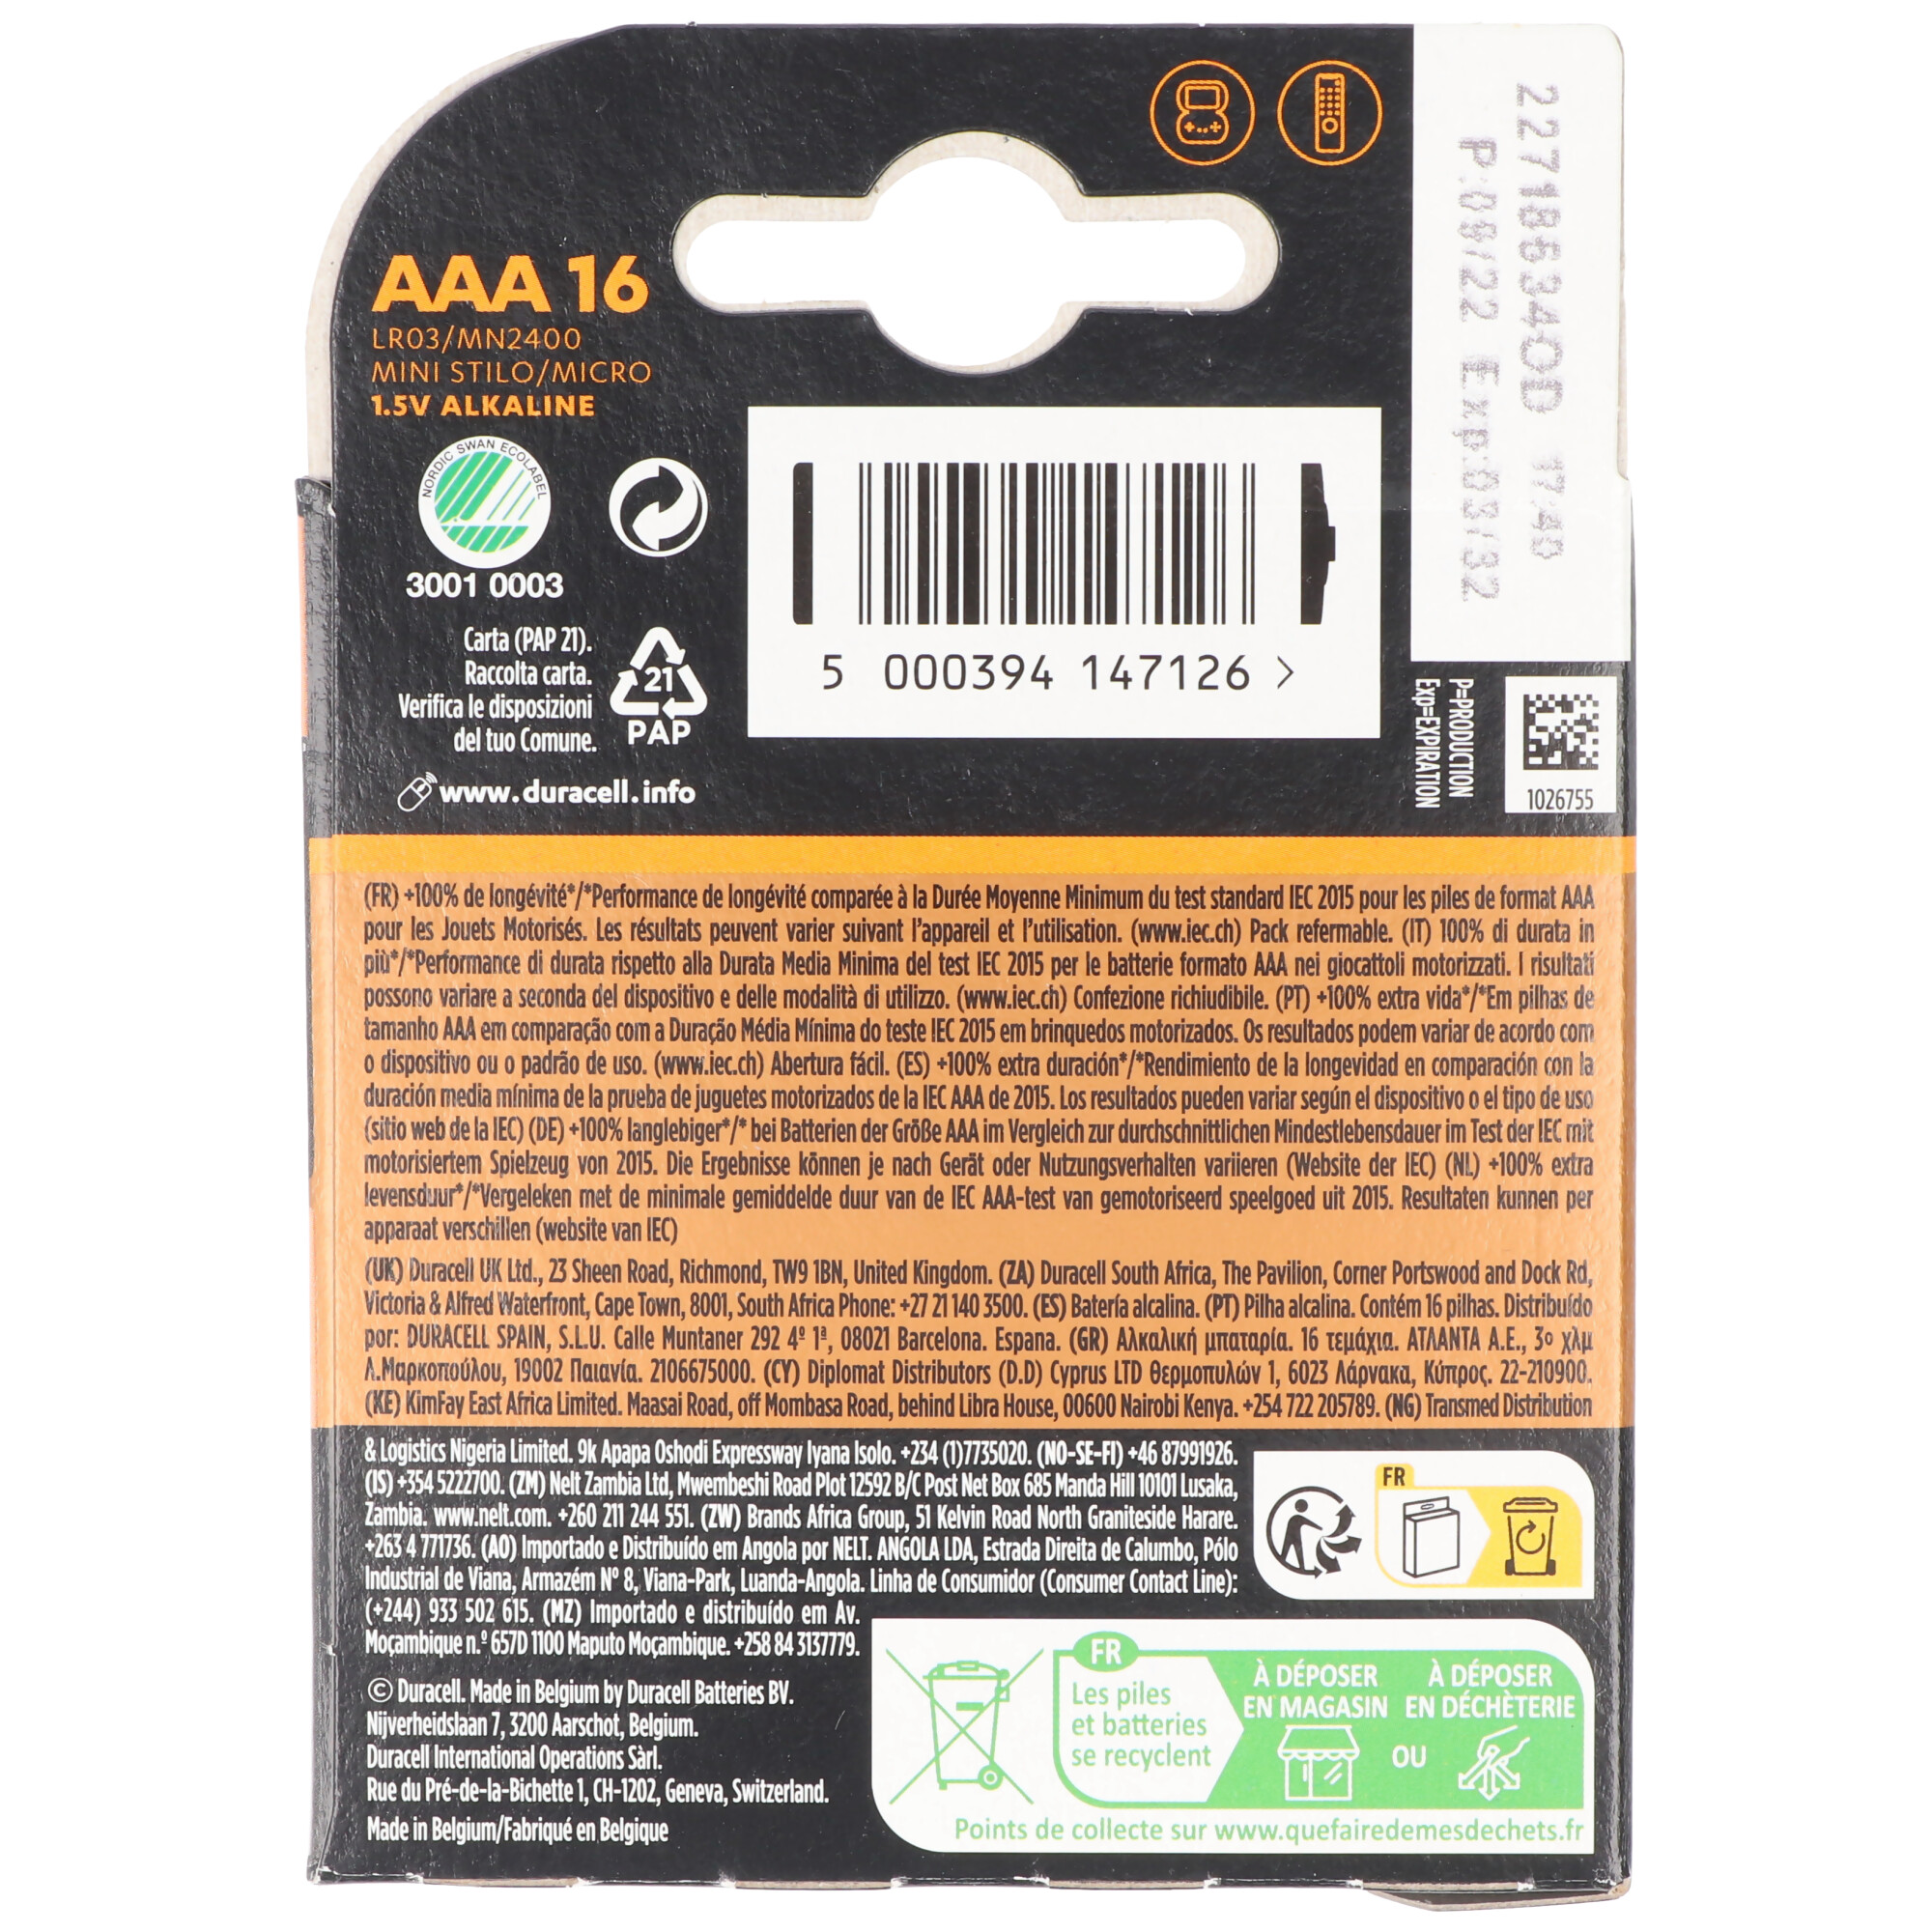 Duracell Batterie Alkaline, Micro, AAA, LR03, 1.5V Plus, Extra Life, Retail Blister (16-Pack)